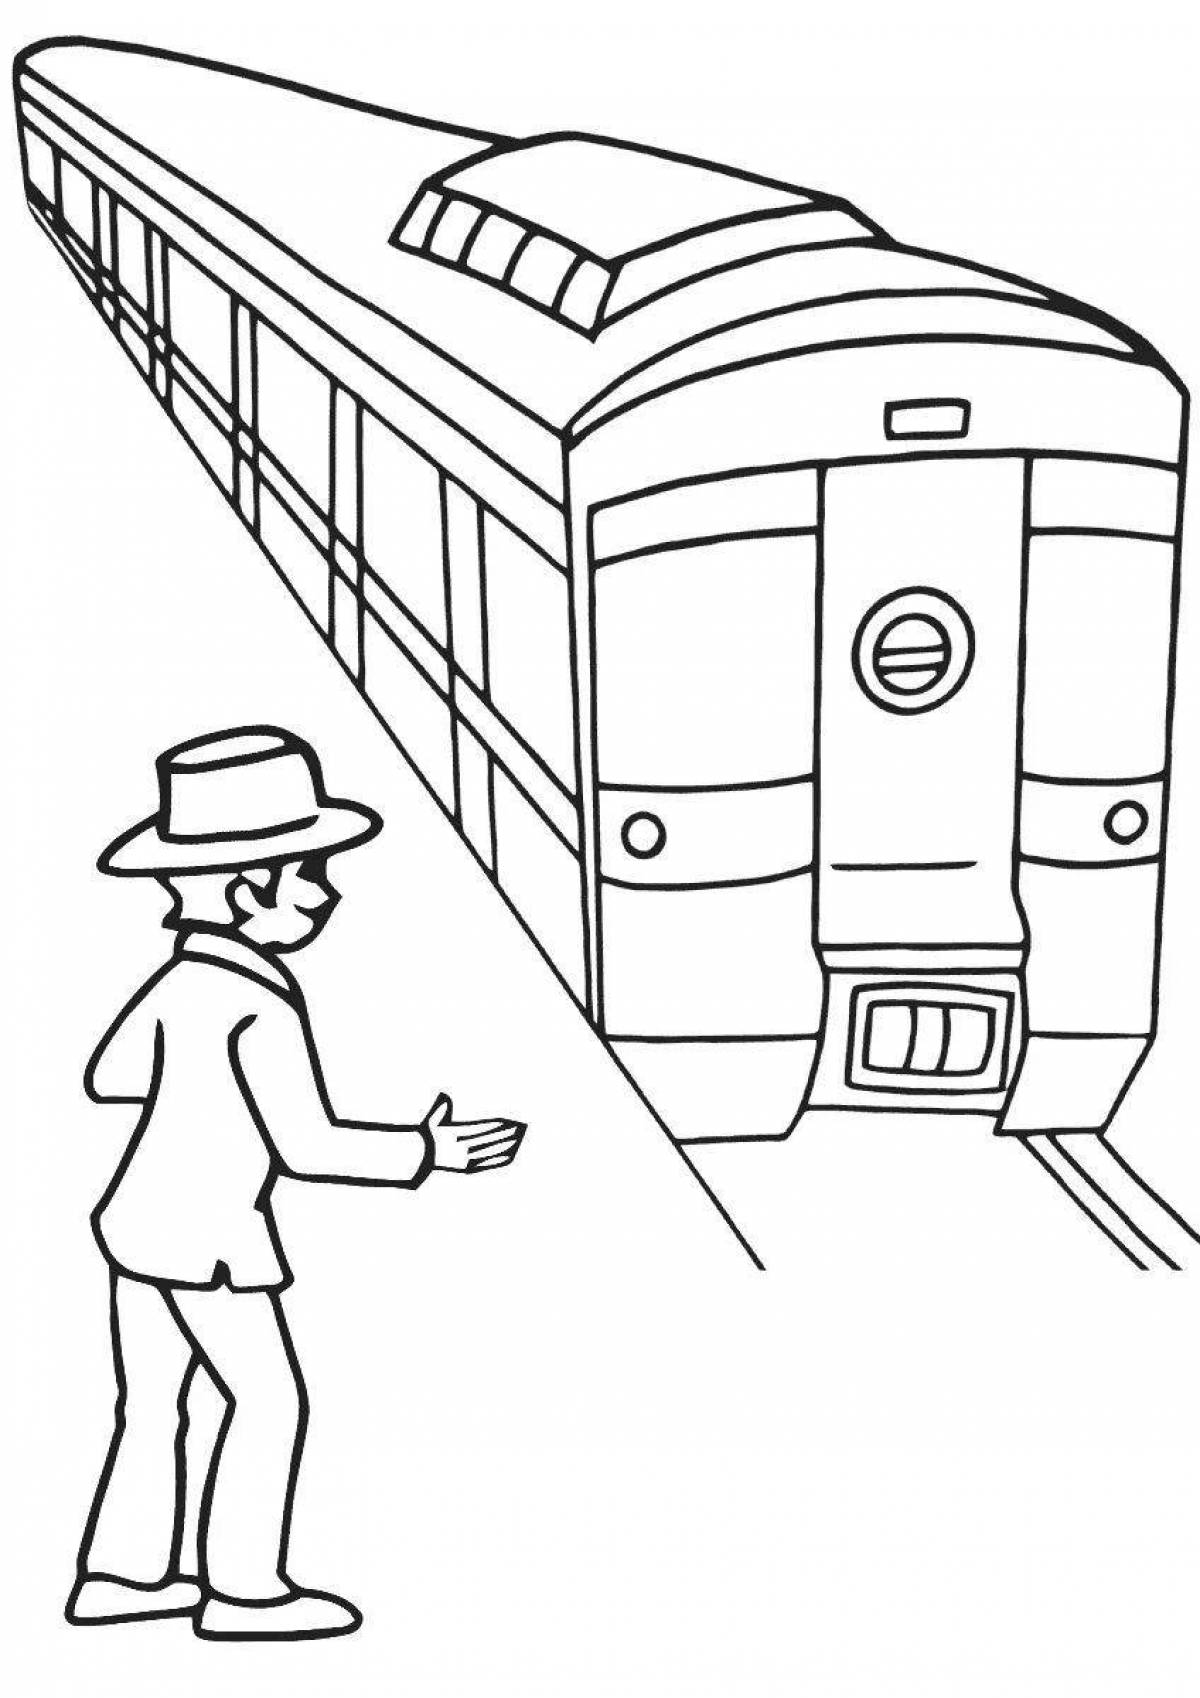 Gourmet Moscow metro coloring page